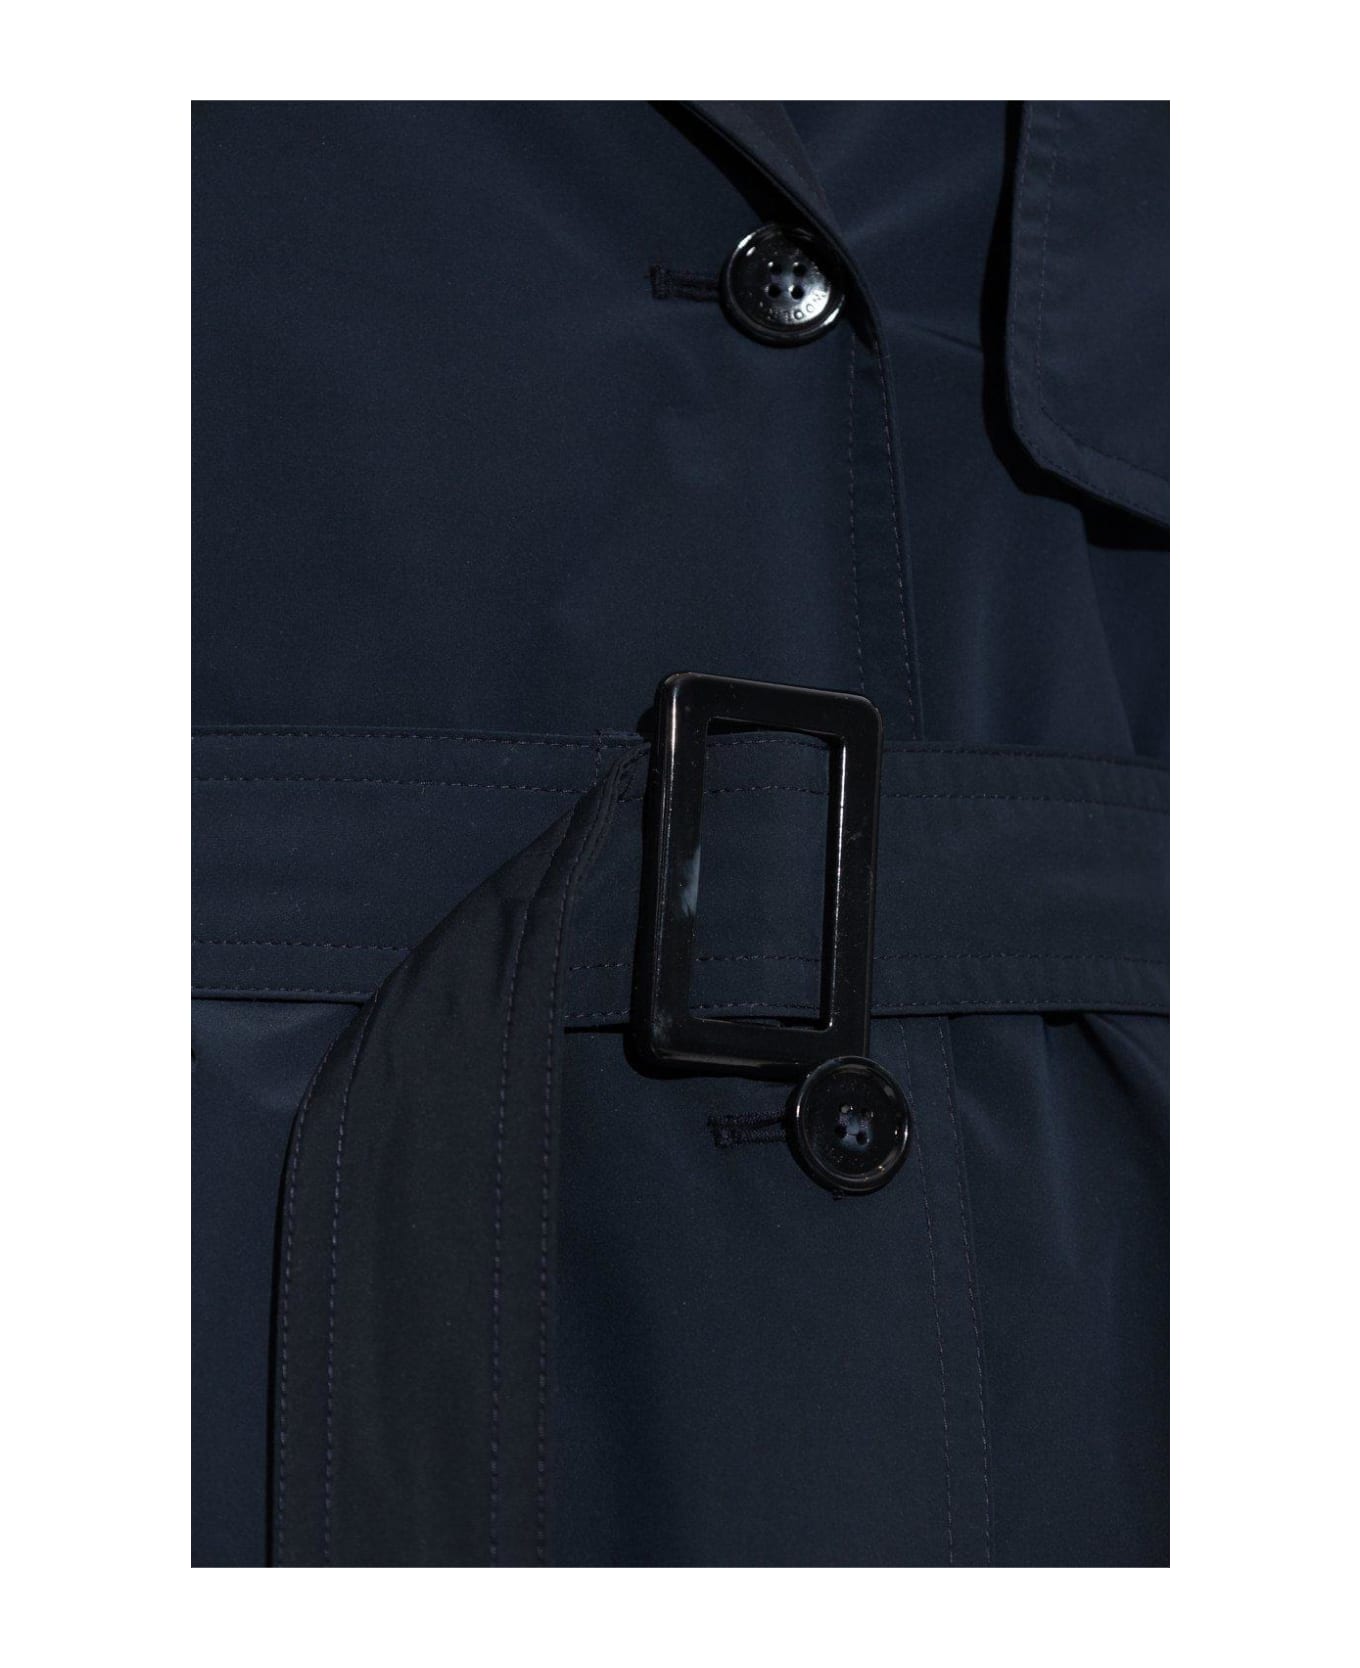 Woolrich Belted Button-up Trench Coat - Melton Blue